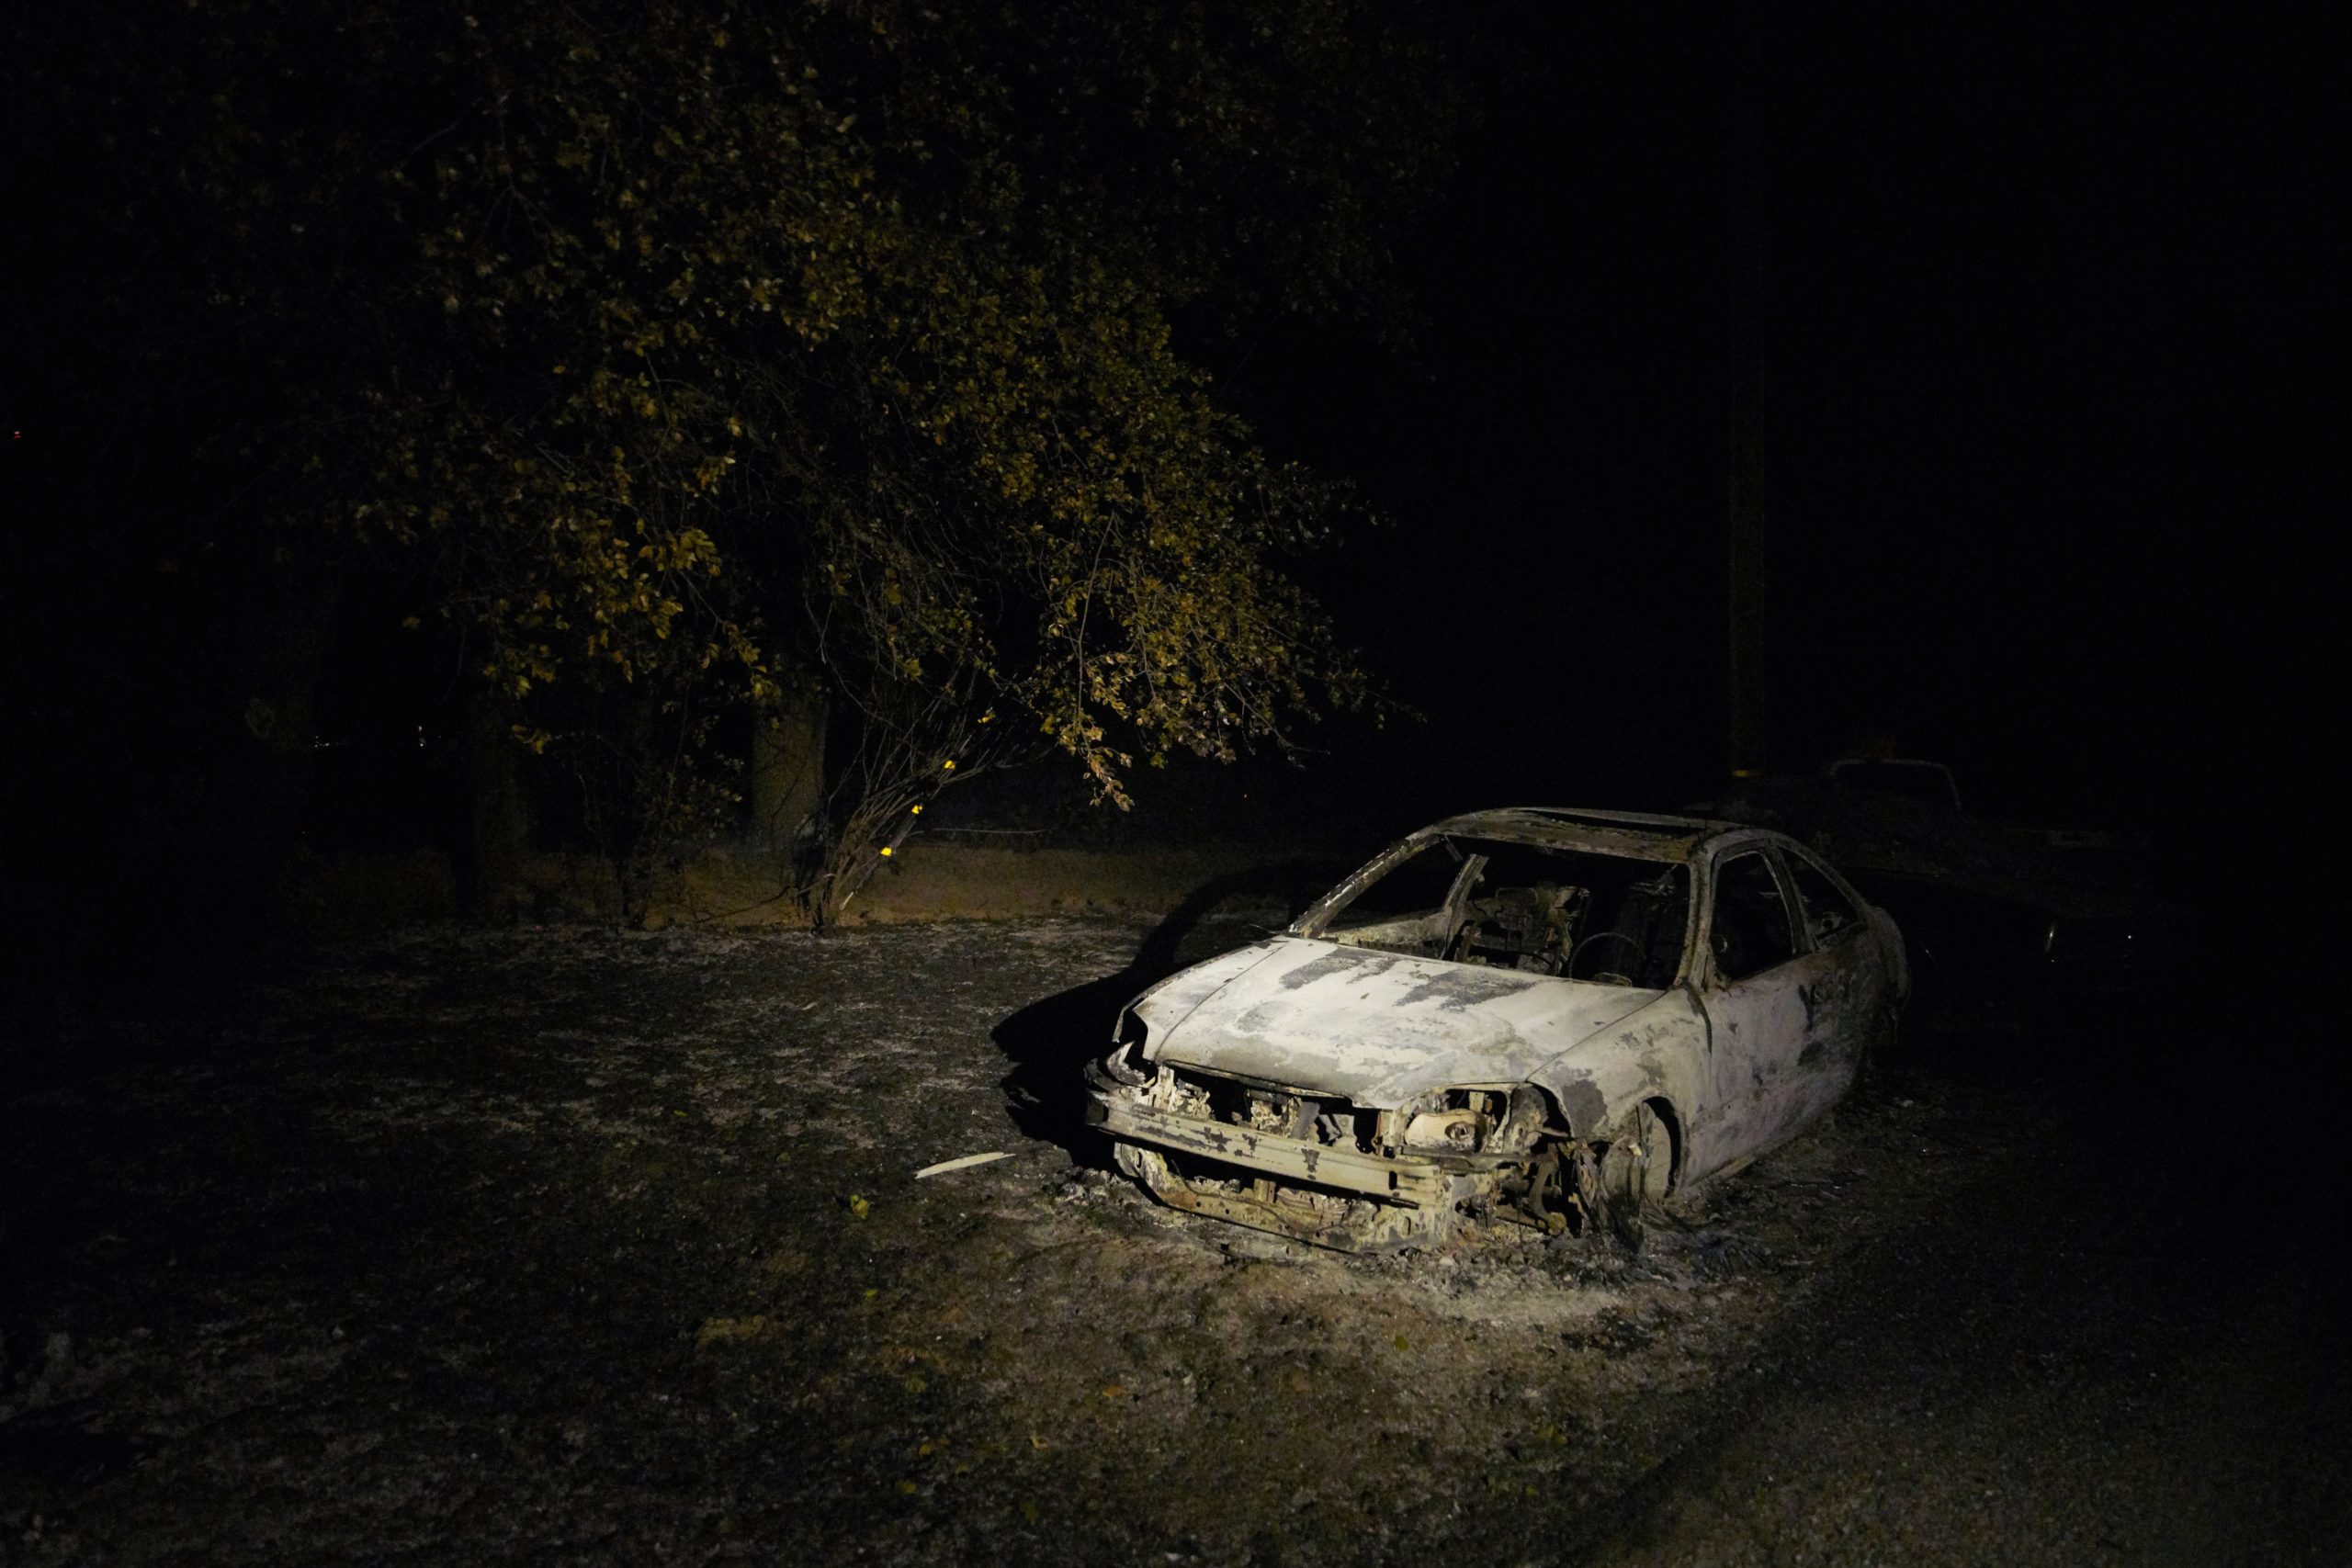 A photo shows a destroyed car from the Zogg fire, in Igo on September 27, 2020 (Photo: Allison Dinner, Getty Images)